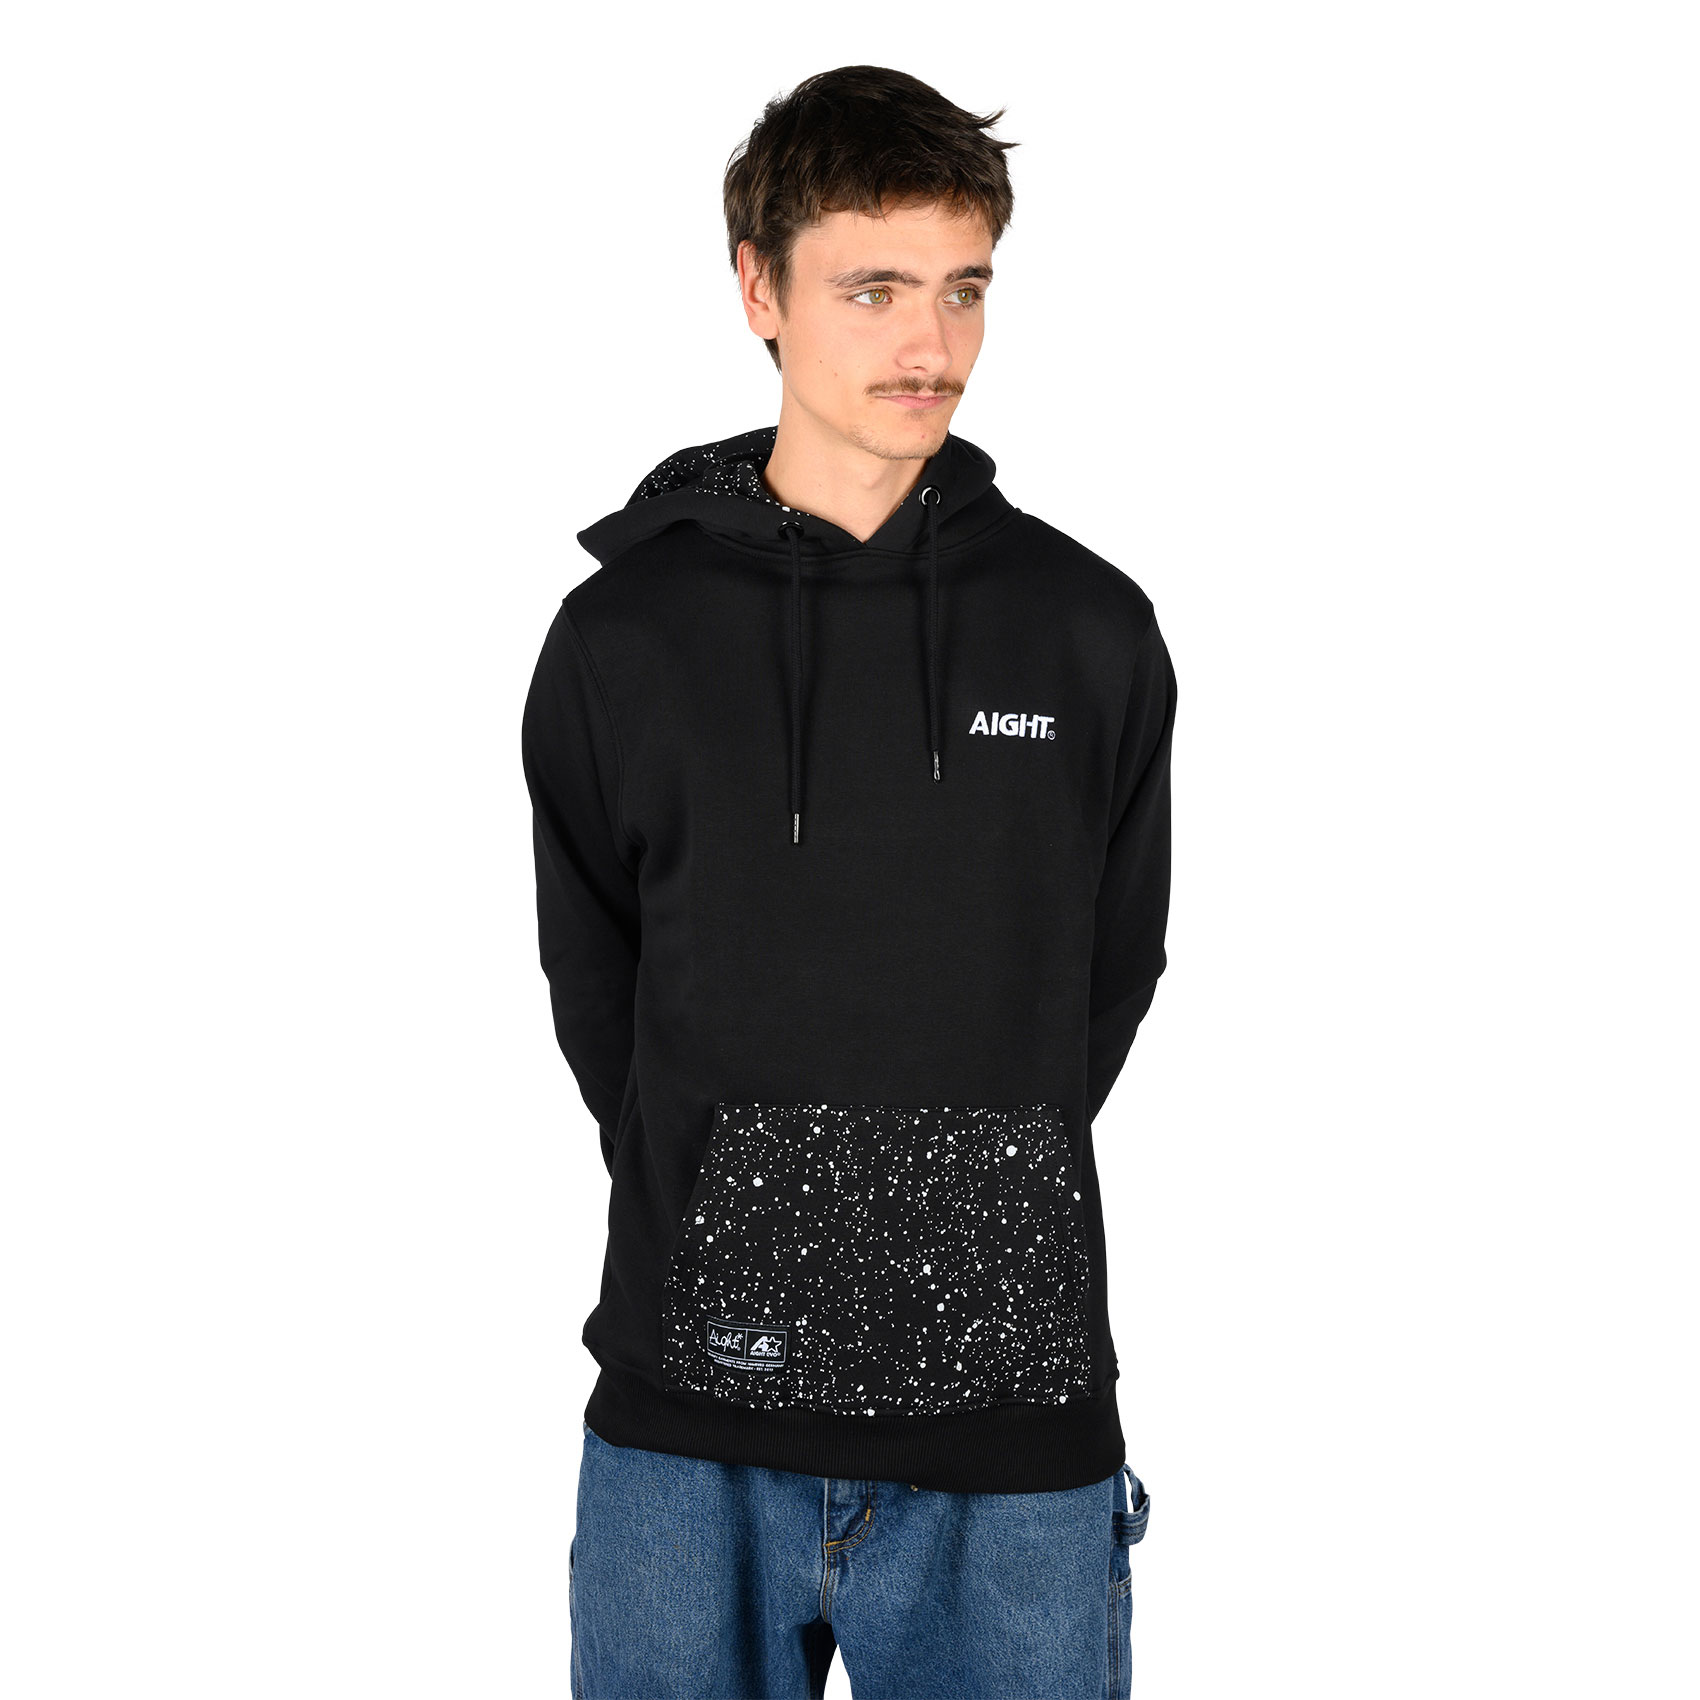 Aight Evolution Hoody Dipper Sports (cosmo black)